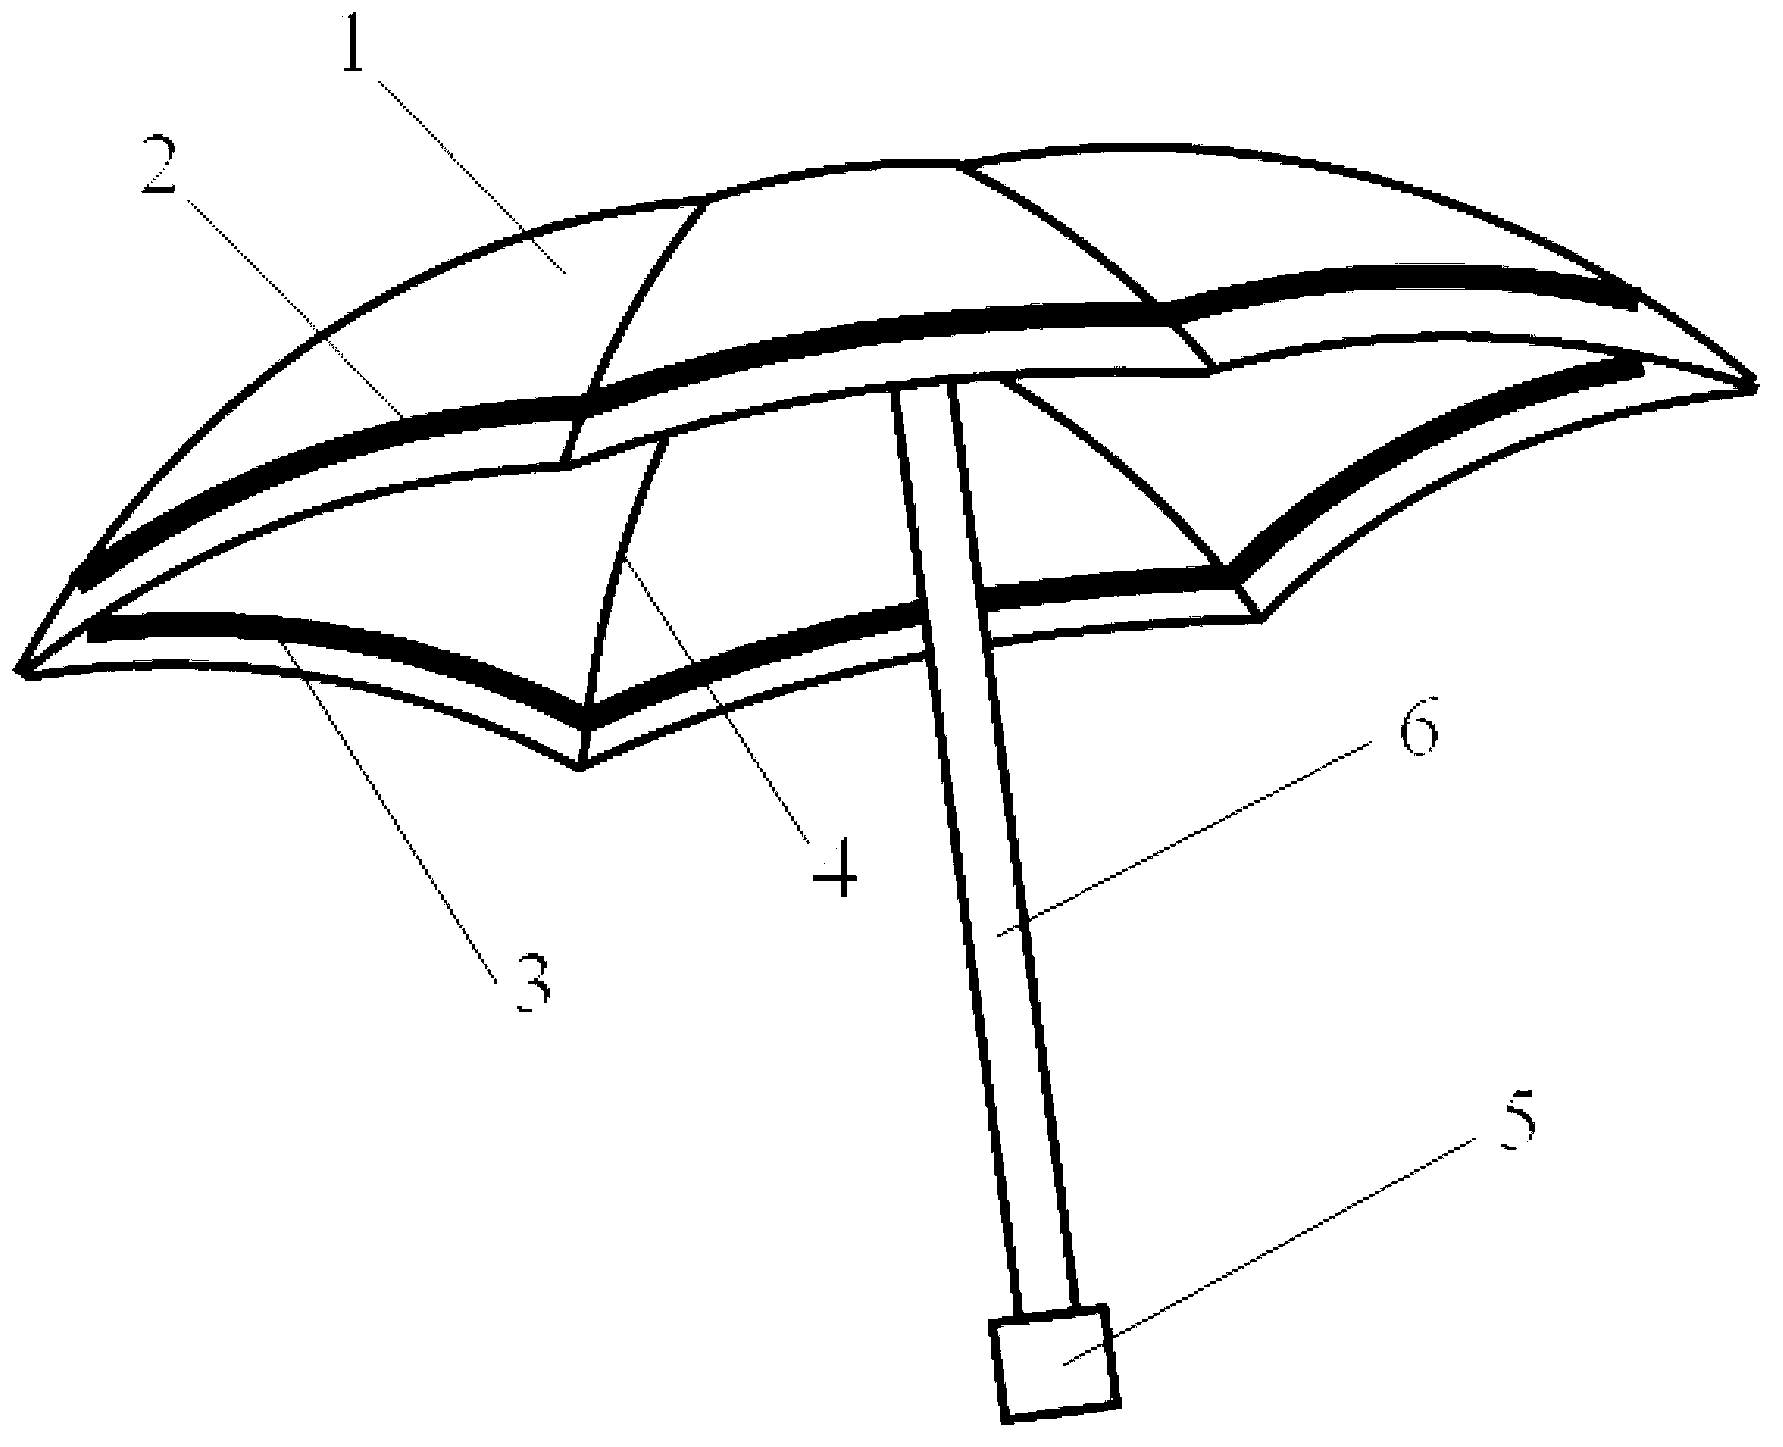 Regular-hexagonal umbrella capable of being bonded freely and used for preventing sunshine and rain